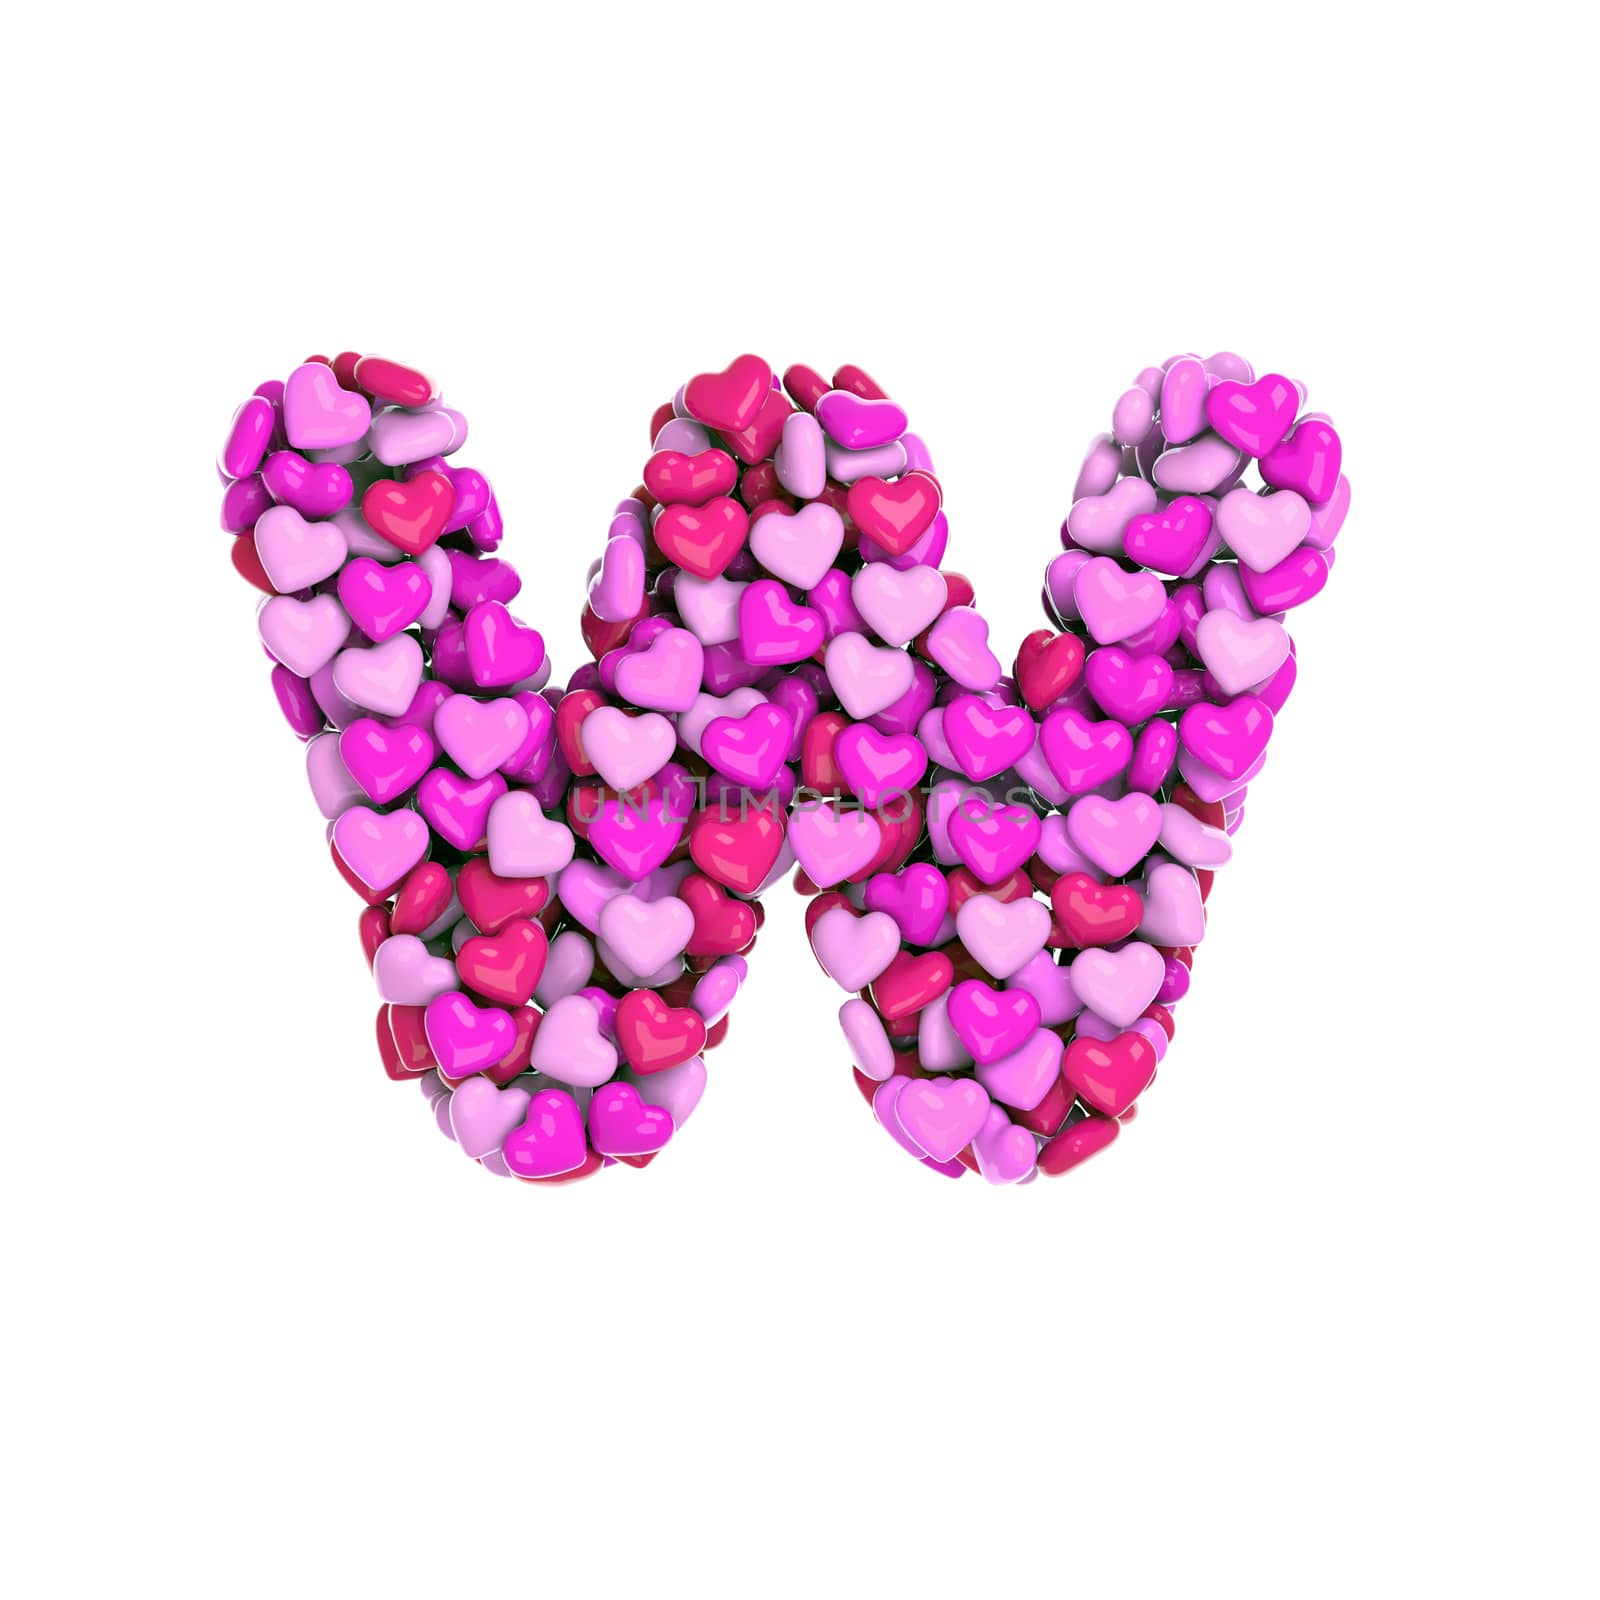 Valentine letter W - Lower-case 3d pink hearts font - Love, passion or wedding concept by chrisroll